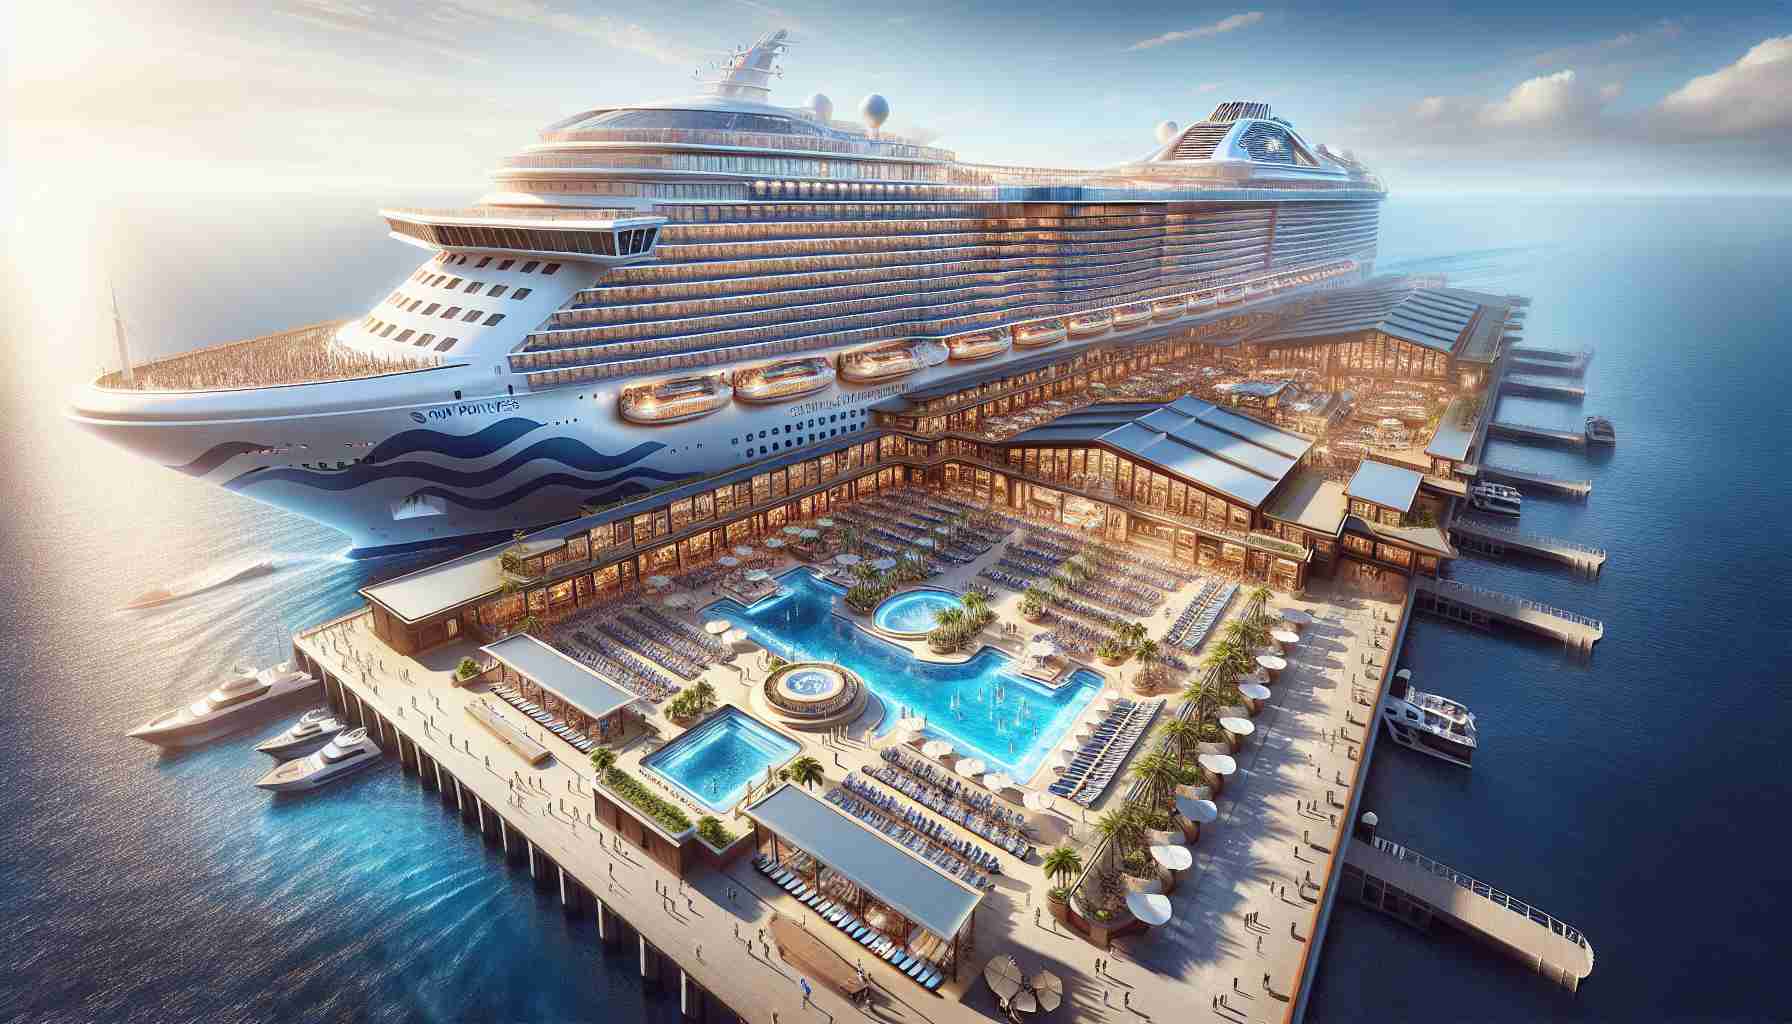 A Grand and luxurious cruise ship named 'Sun Princess' docked at a sun-kissed port under a clear, blue sky. The massive cruise liner is filled with exceptional amenities unfold layer by layer - lavish guestrooms with balconies overlooking the ocean, a multitude of dining options serving gourmet cuisines, recreational facilities like swimming pools, spa services, and spacious decks for guests to lounge and enjoy the sea breeze. The scene sets the tone for the exciting new adventures awaiting the guests aboard this sea giant. The image should be highly detailed and have a realistic, high-definition quality.